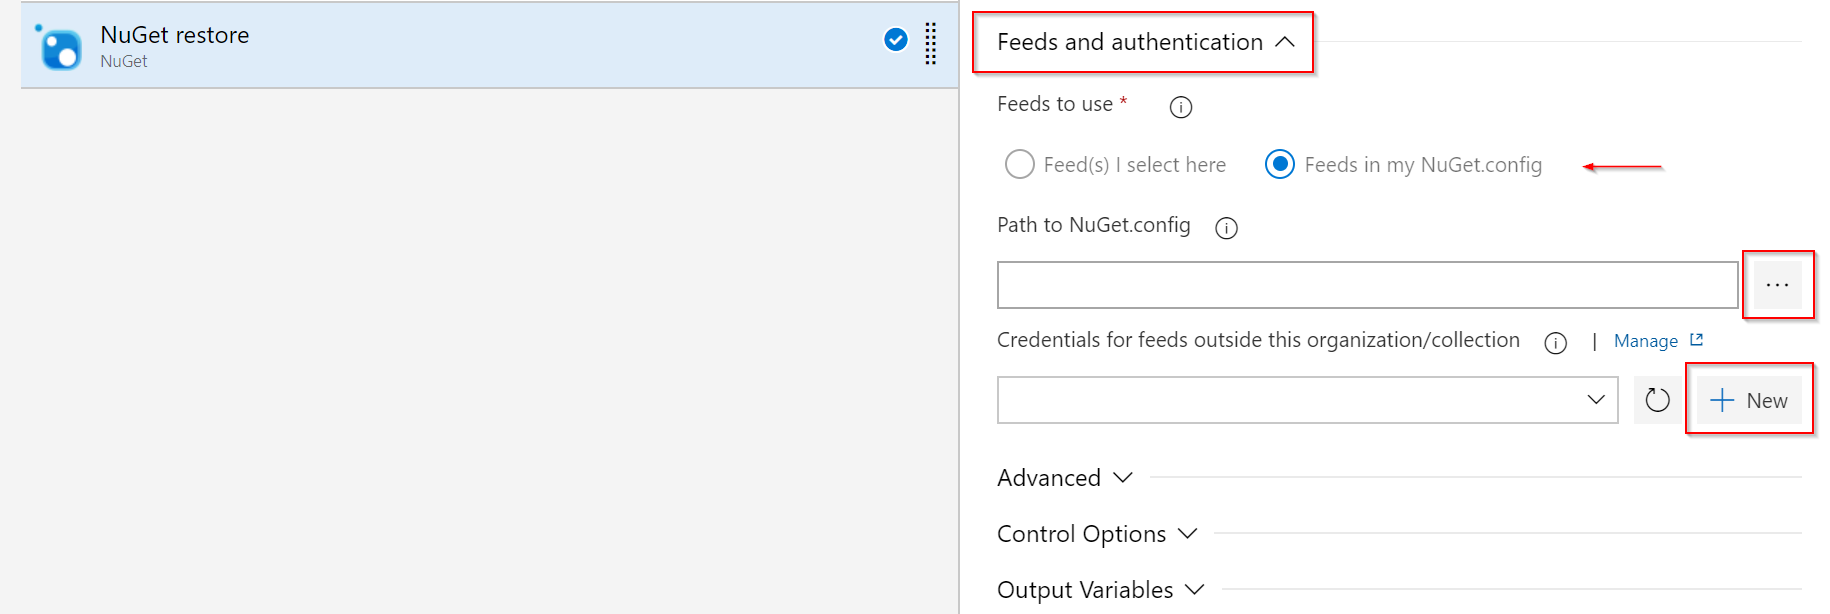 Screenshot showing how to configure the NuGet restore task